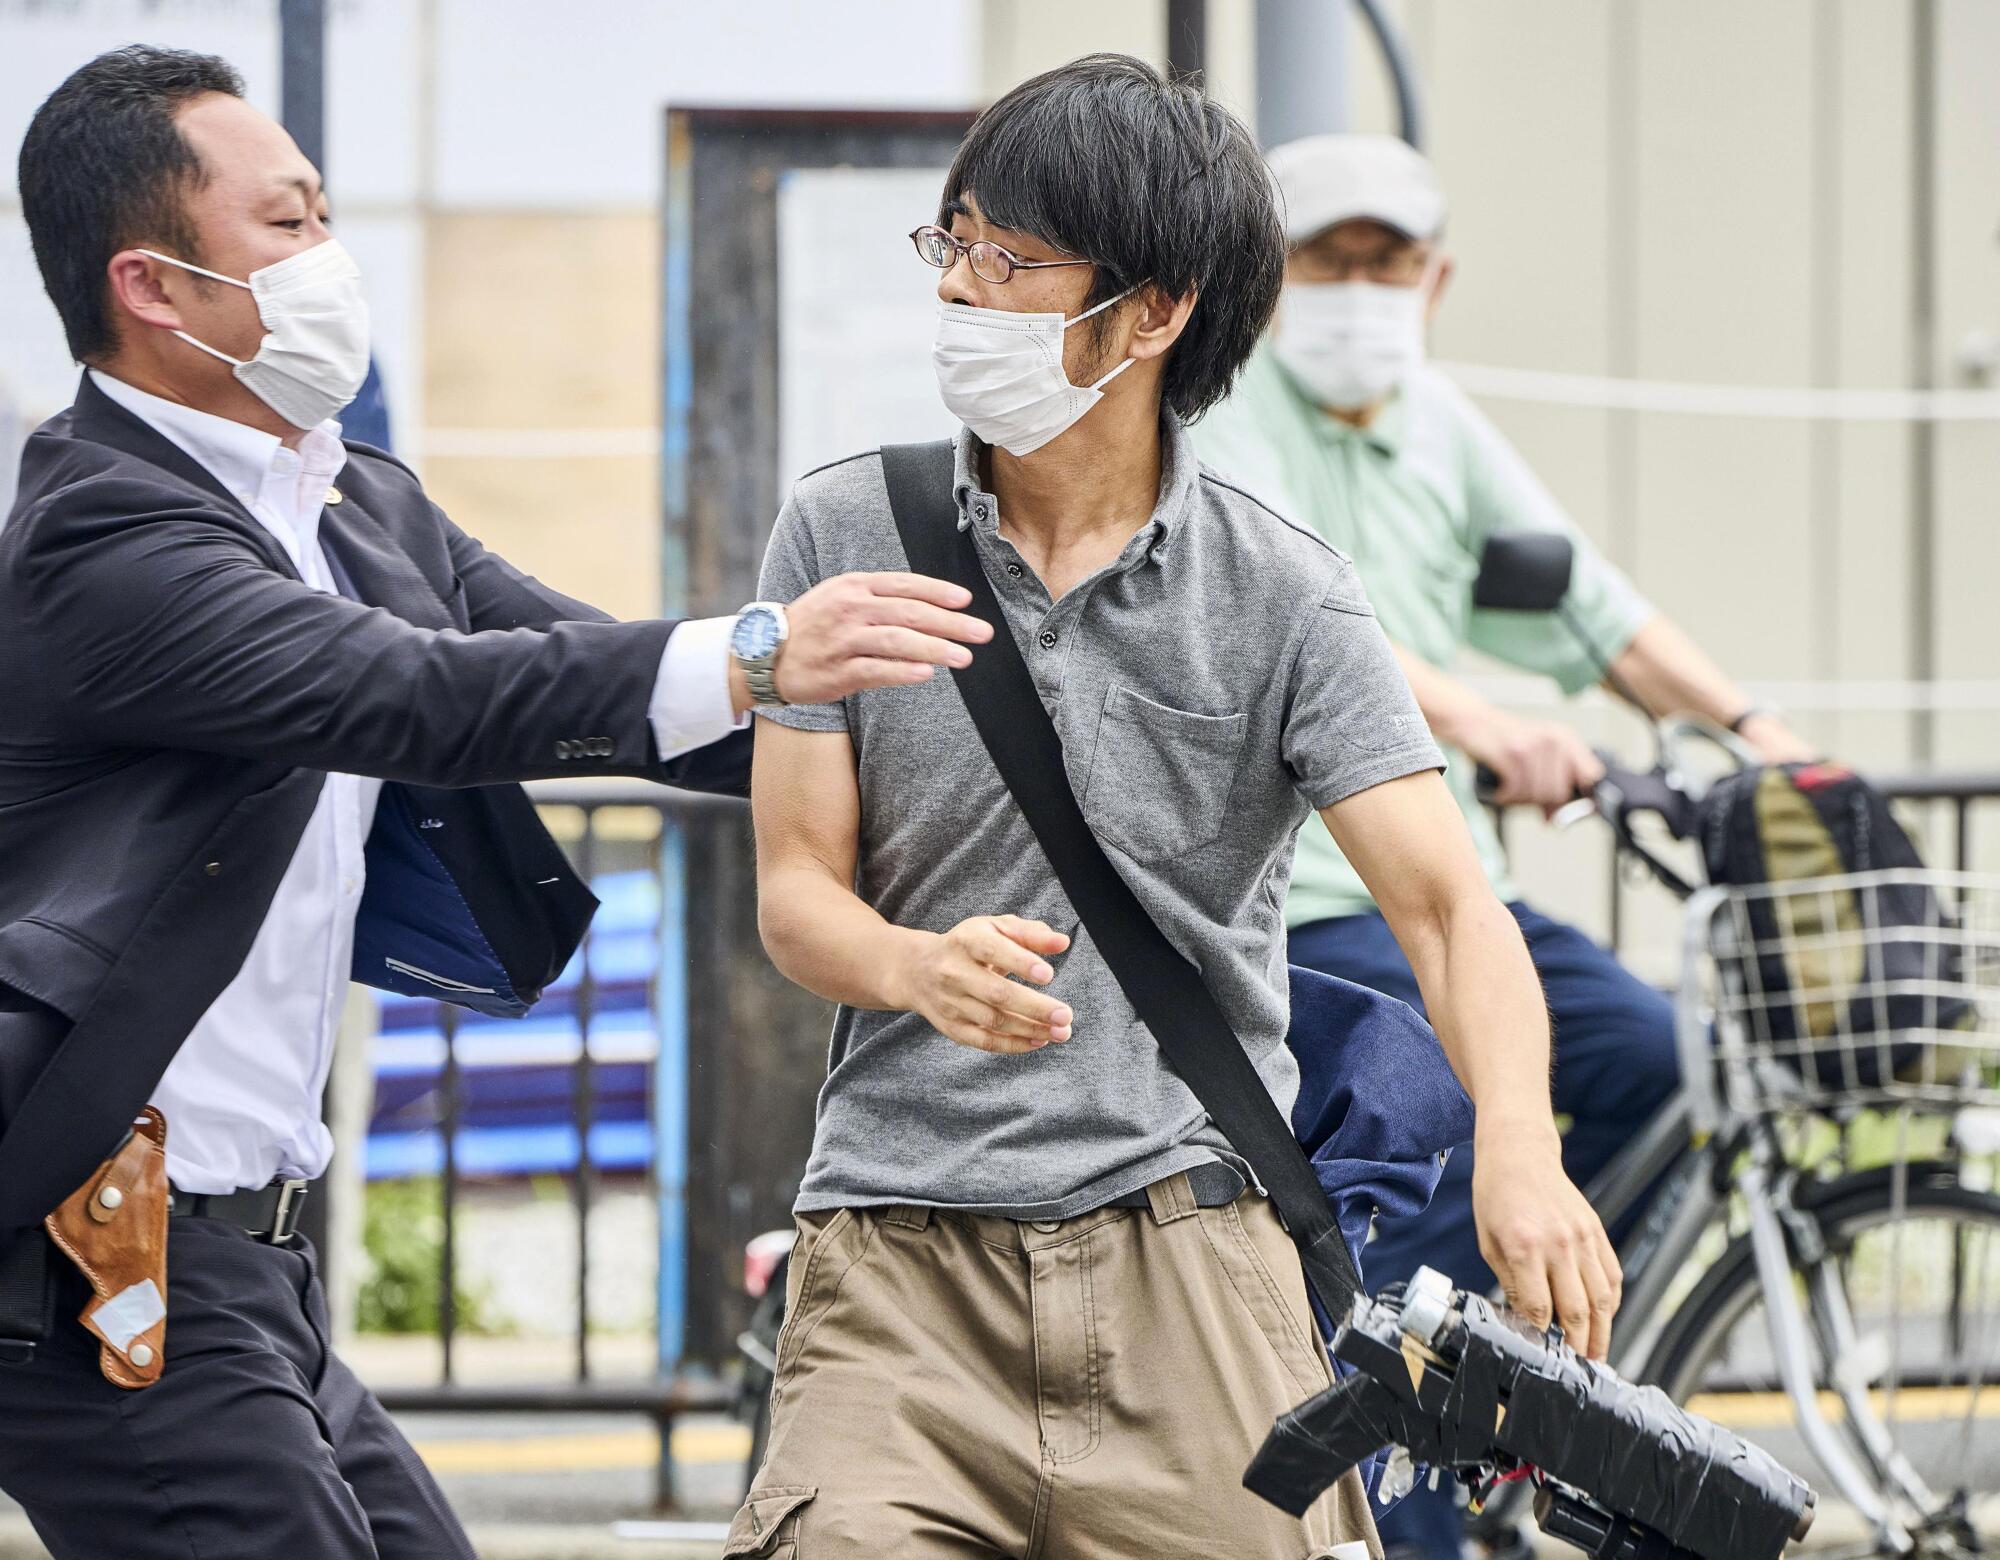 Tetsuya Yamagami, center, holding a weapon, is detained near the site of gunshots in Nara, western Japan